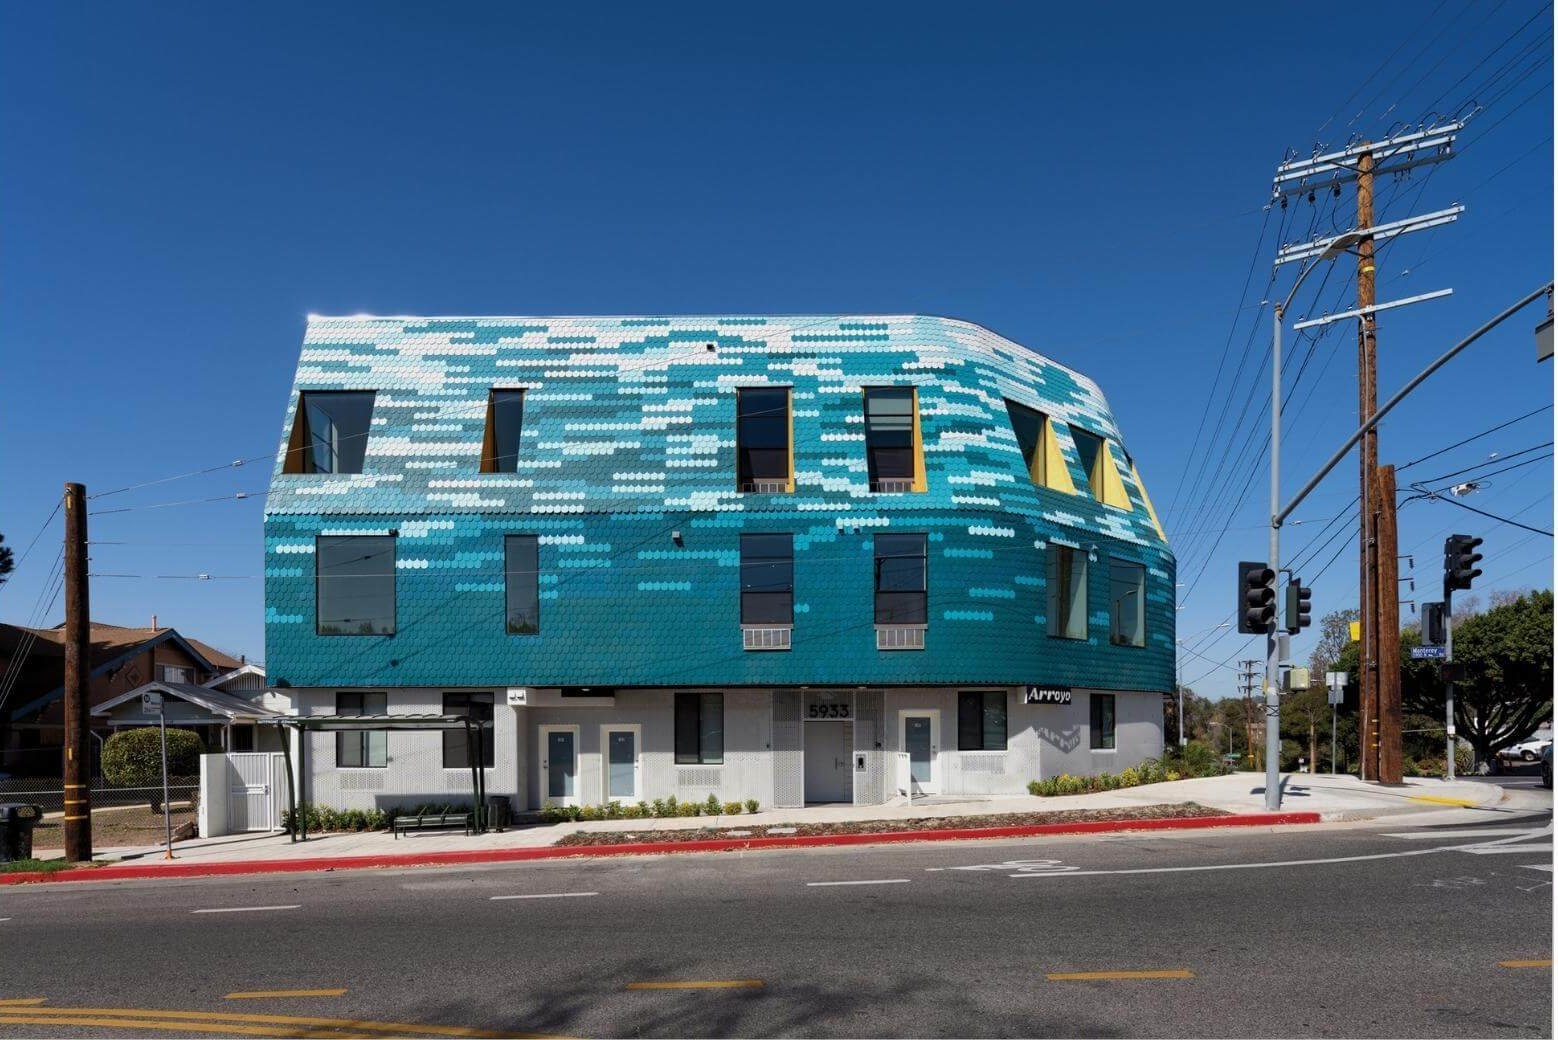 exterior of a small multi-family building with a colorful textured facade